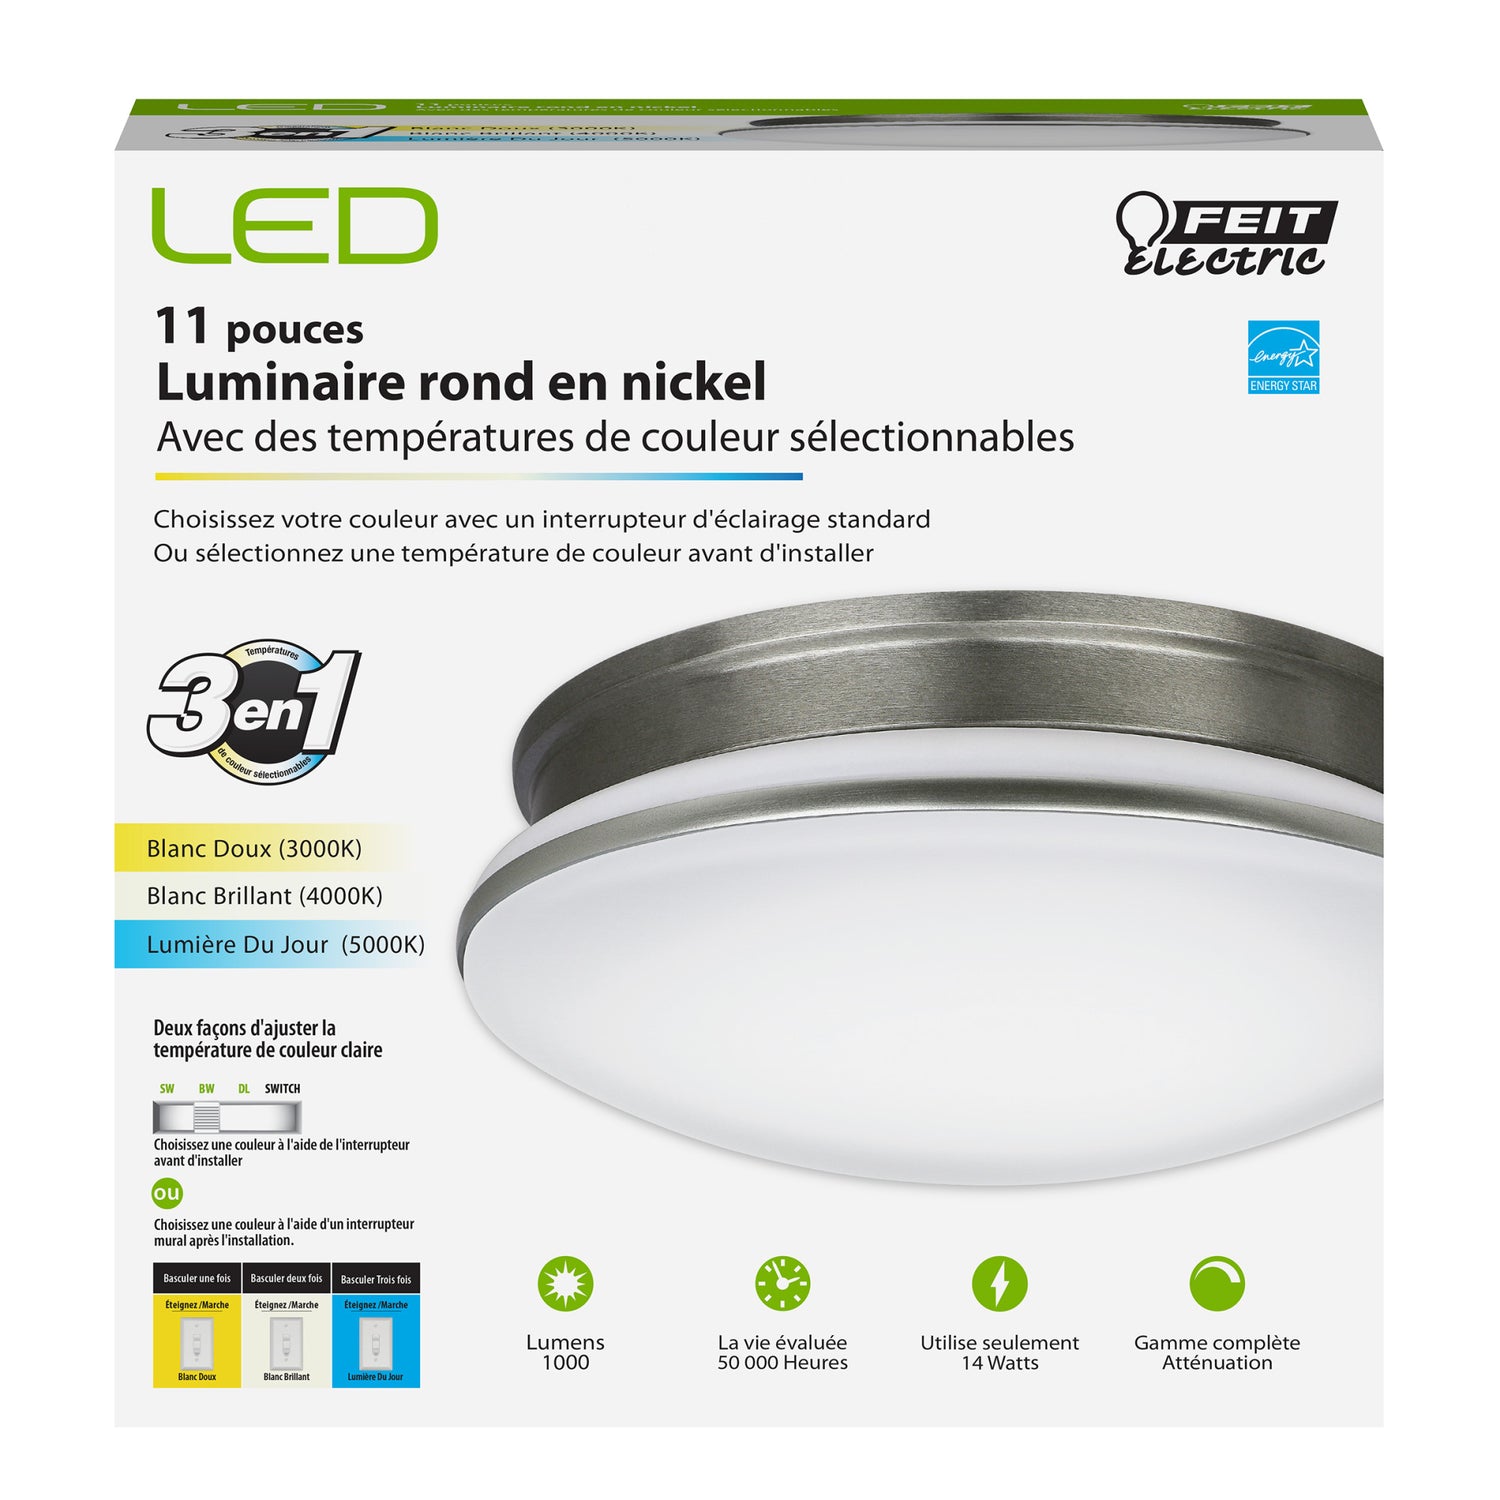 11 in. Round 3-in-1 Selectable Color Puff LED Ceiling Fixture